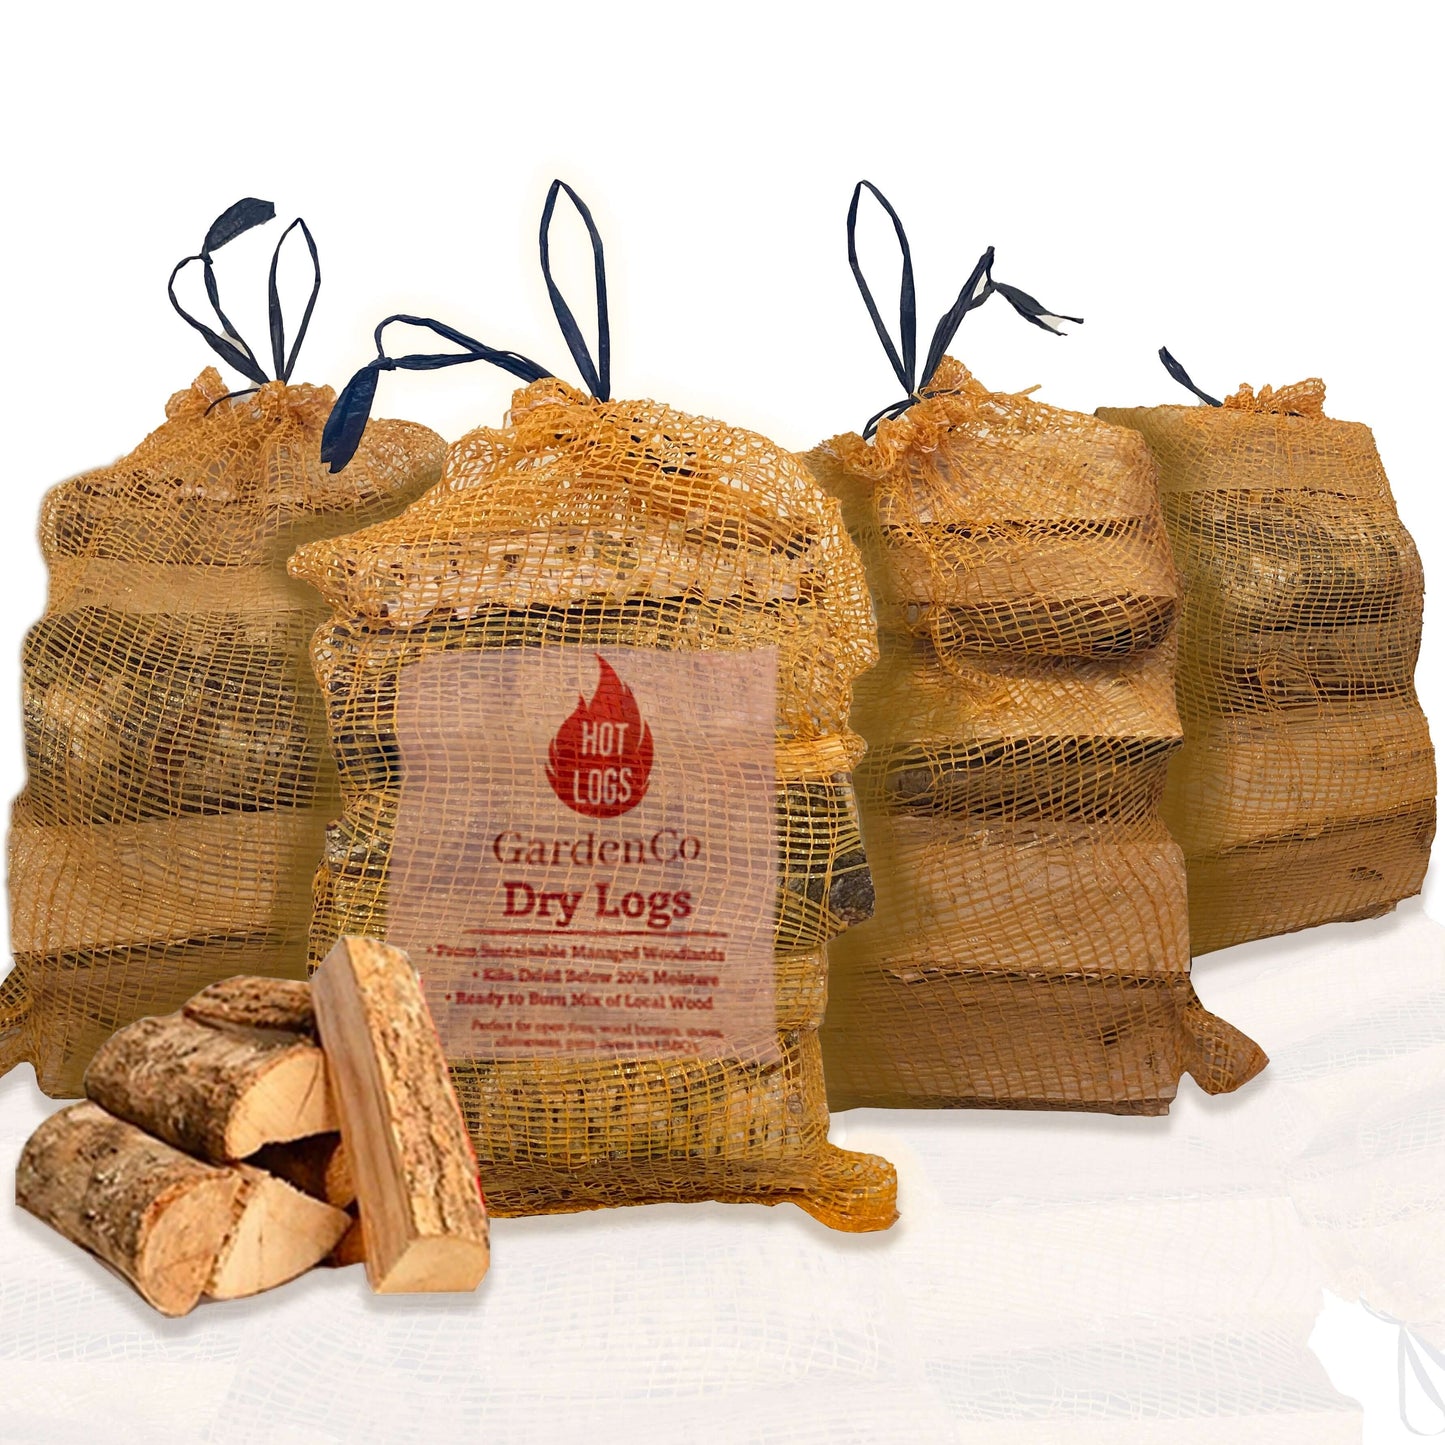 4x Large Nets Kiln Dried Fire Logs, (approx 36kg), For Wood Burners, Stoves & Fireplaces, Hot Burning Sustainably Sourced Logs.